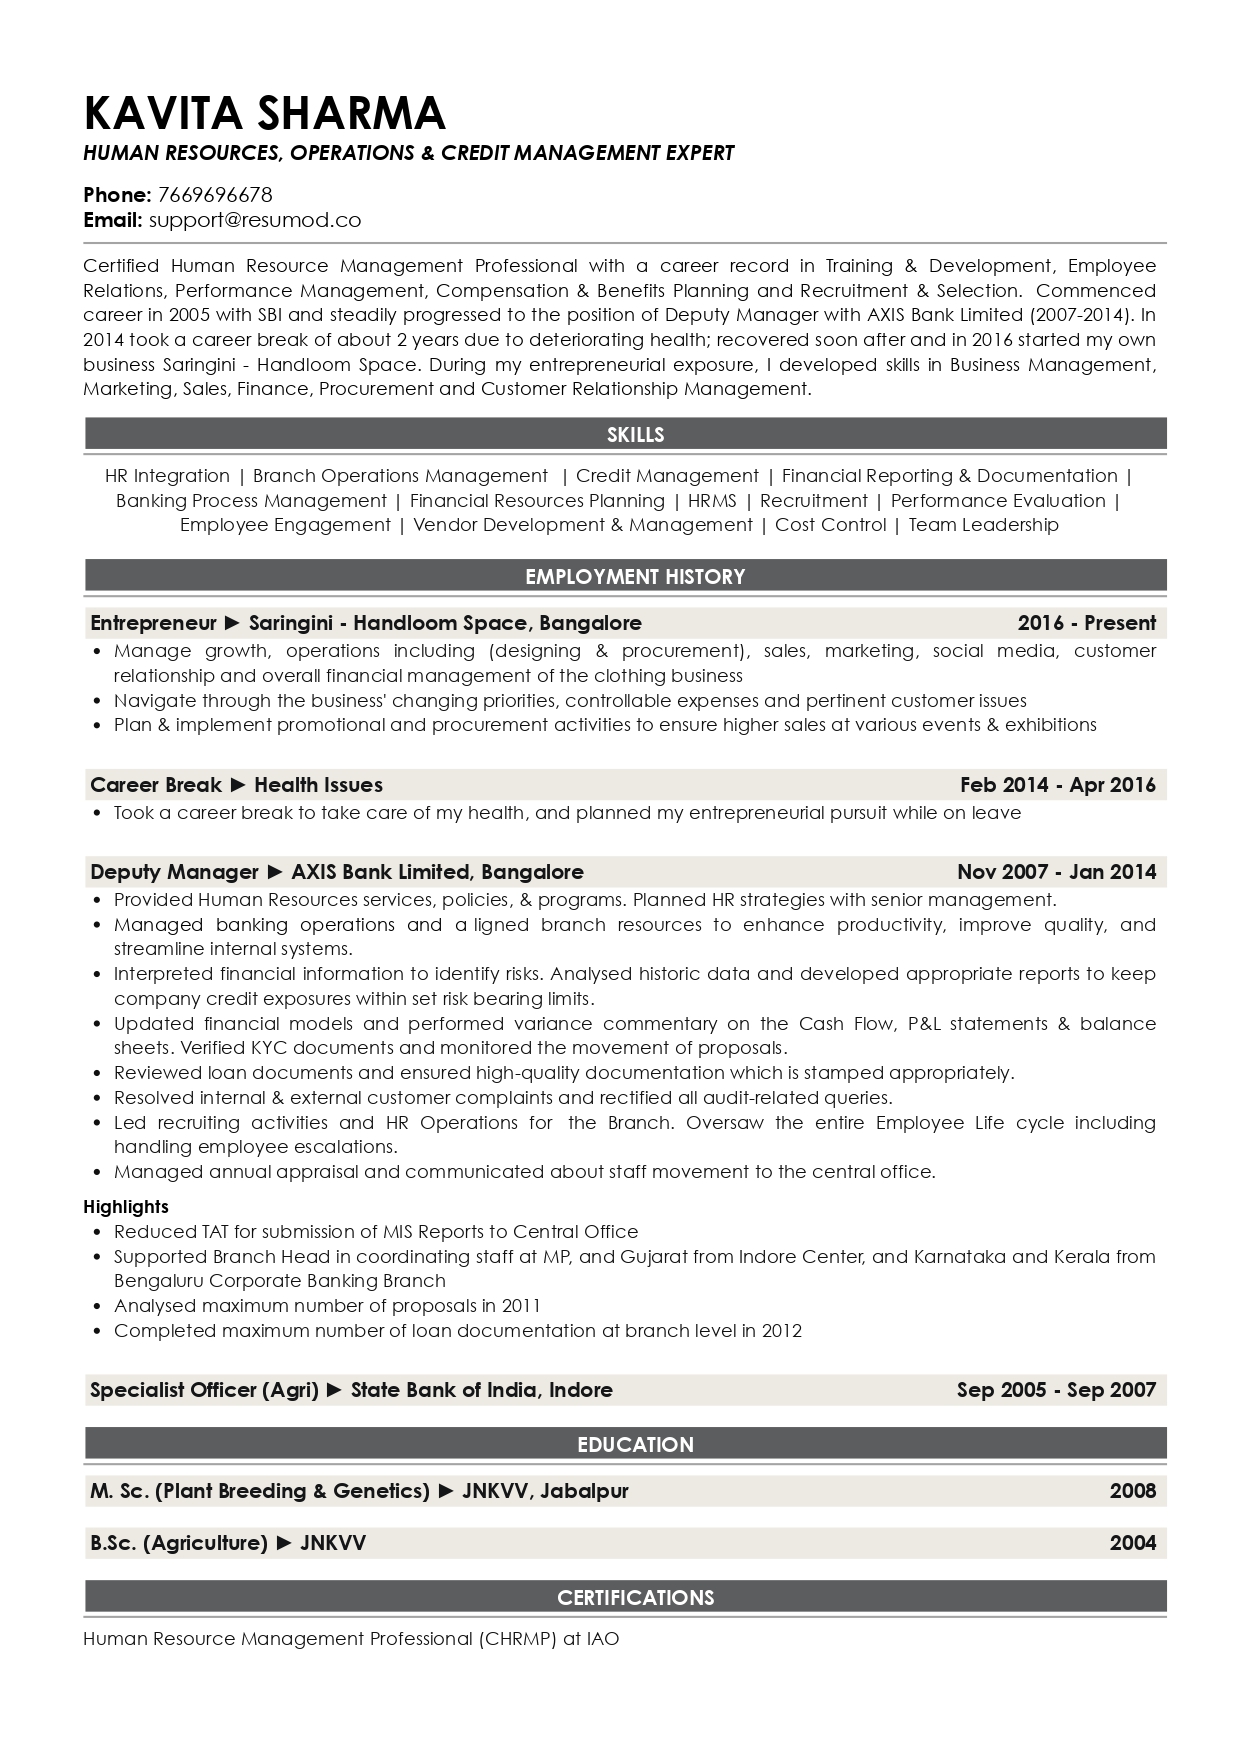 Resume of HR, Operations & Credit Management Expert with Career Break